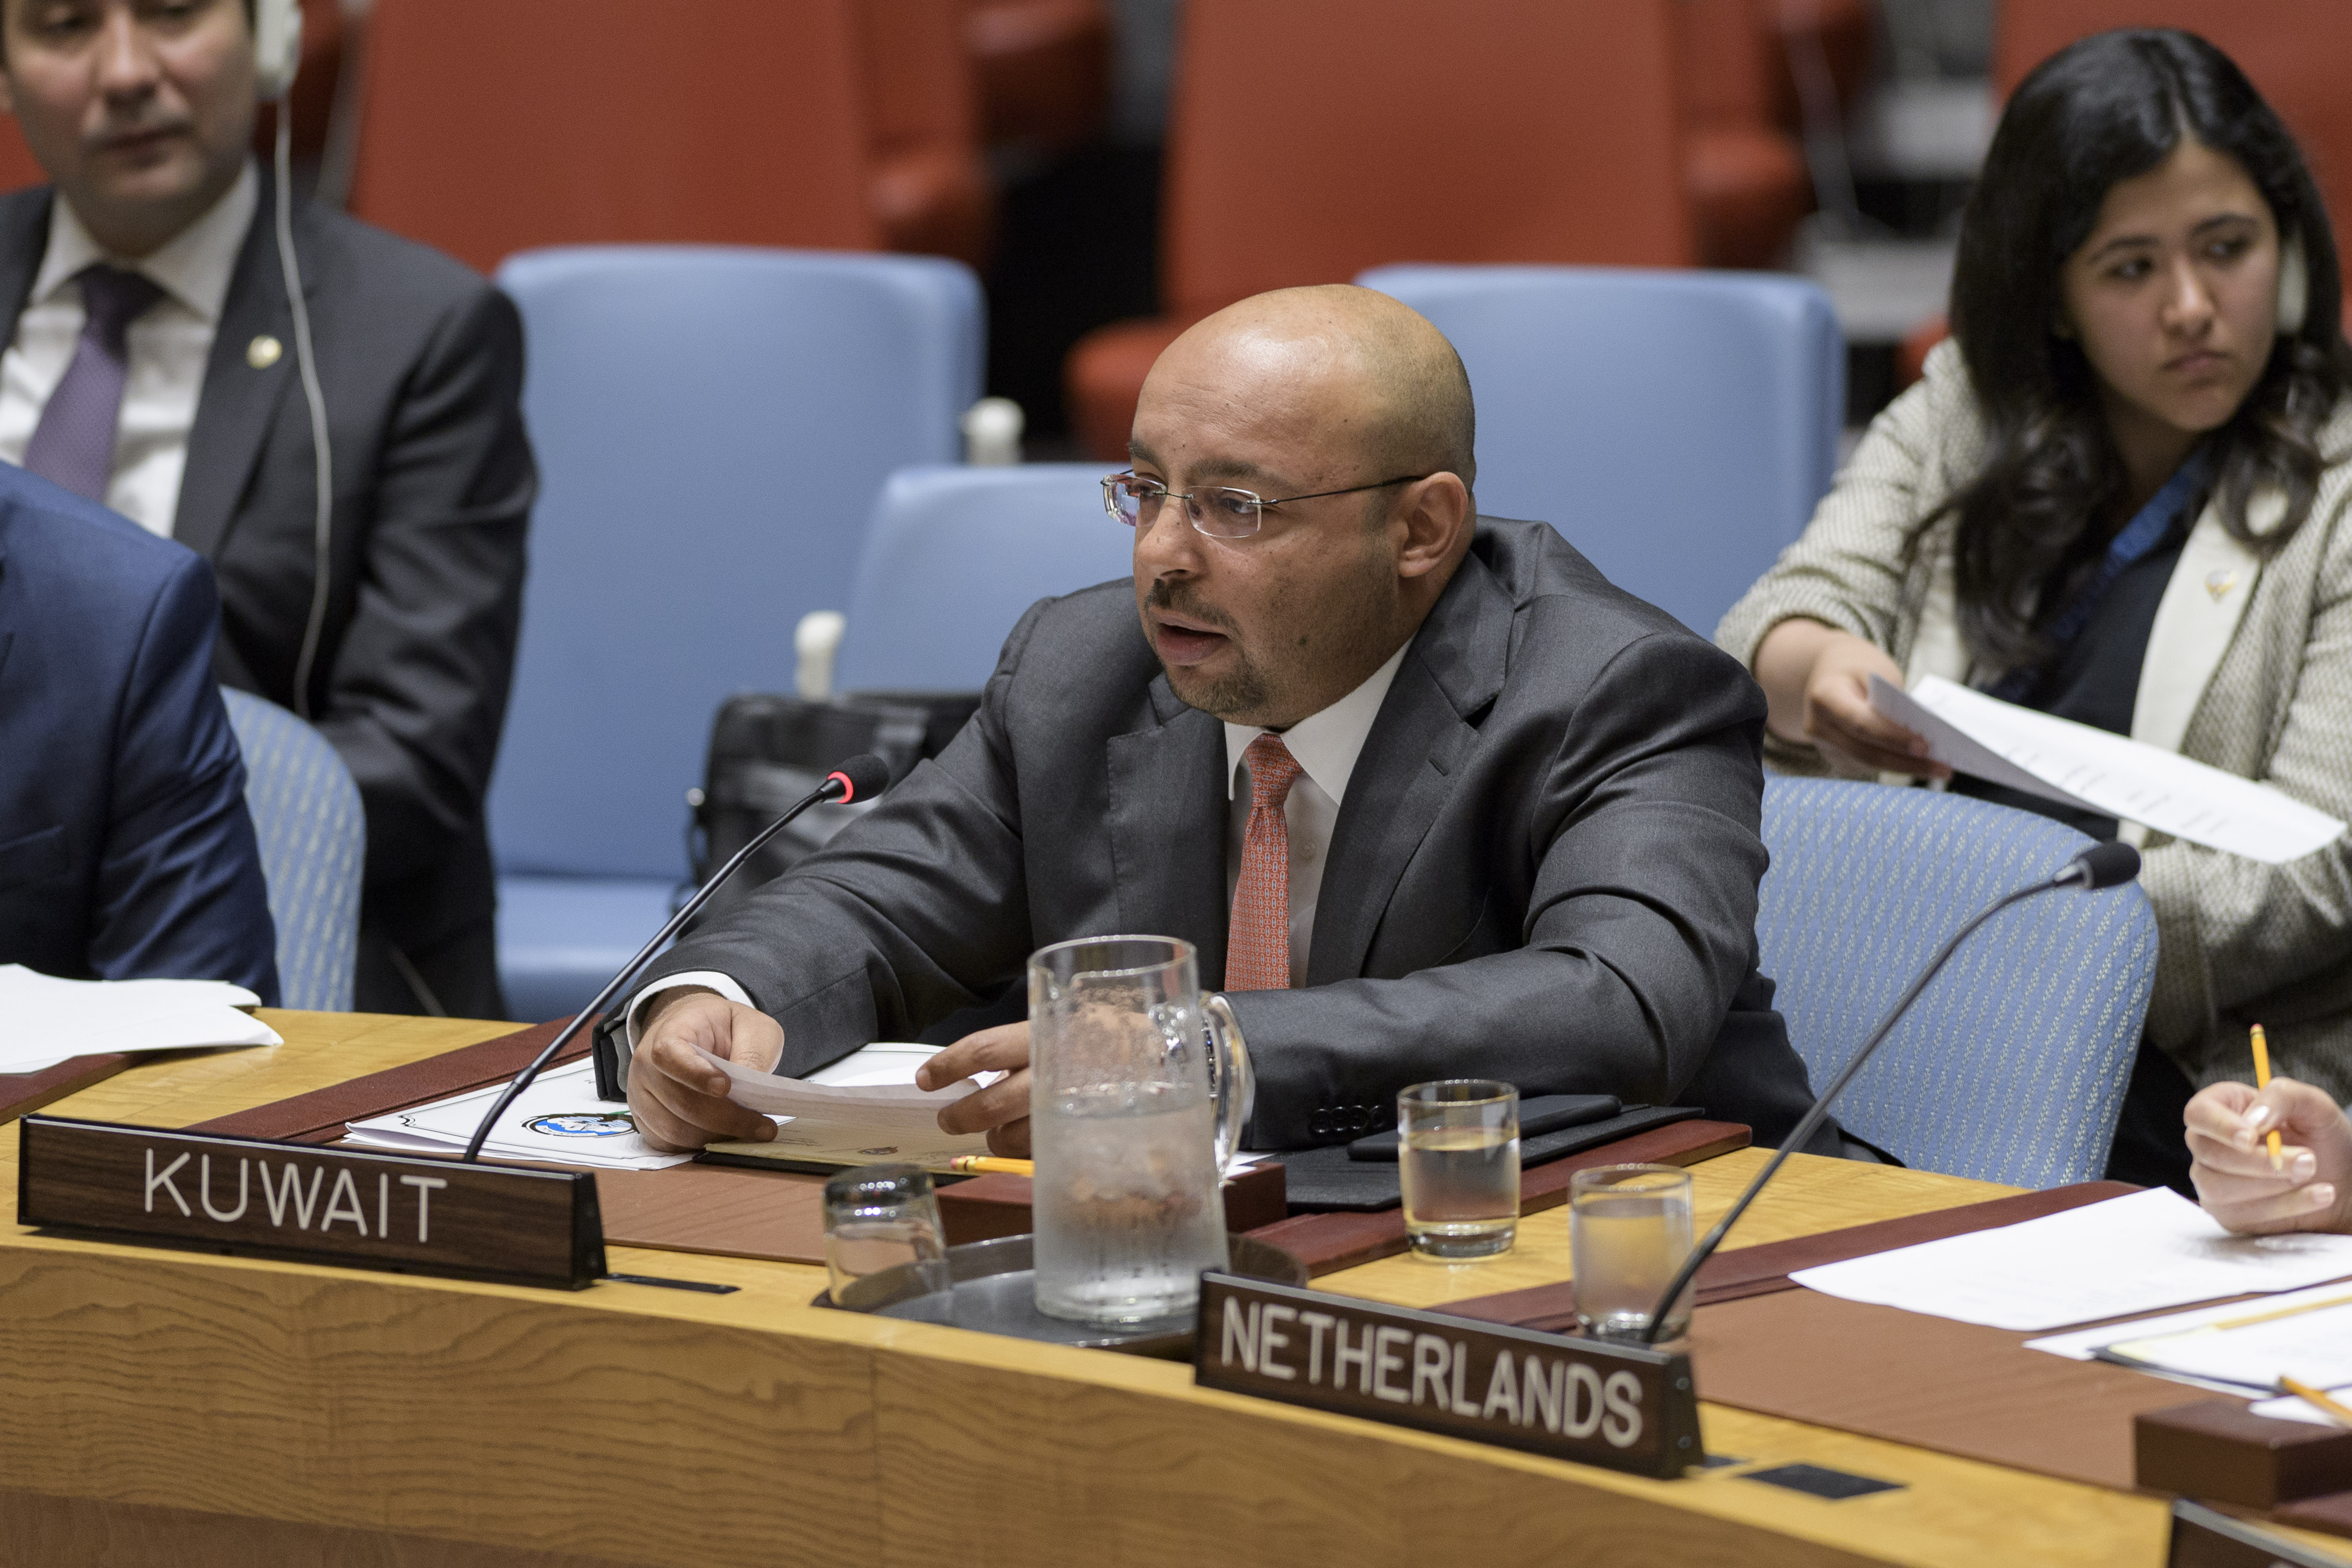 Talal Al-Fassam, the Kuwaiti permanent mission at the United Nations' acting charge d'affaires